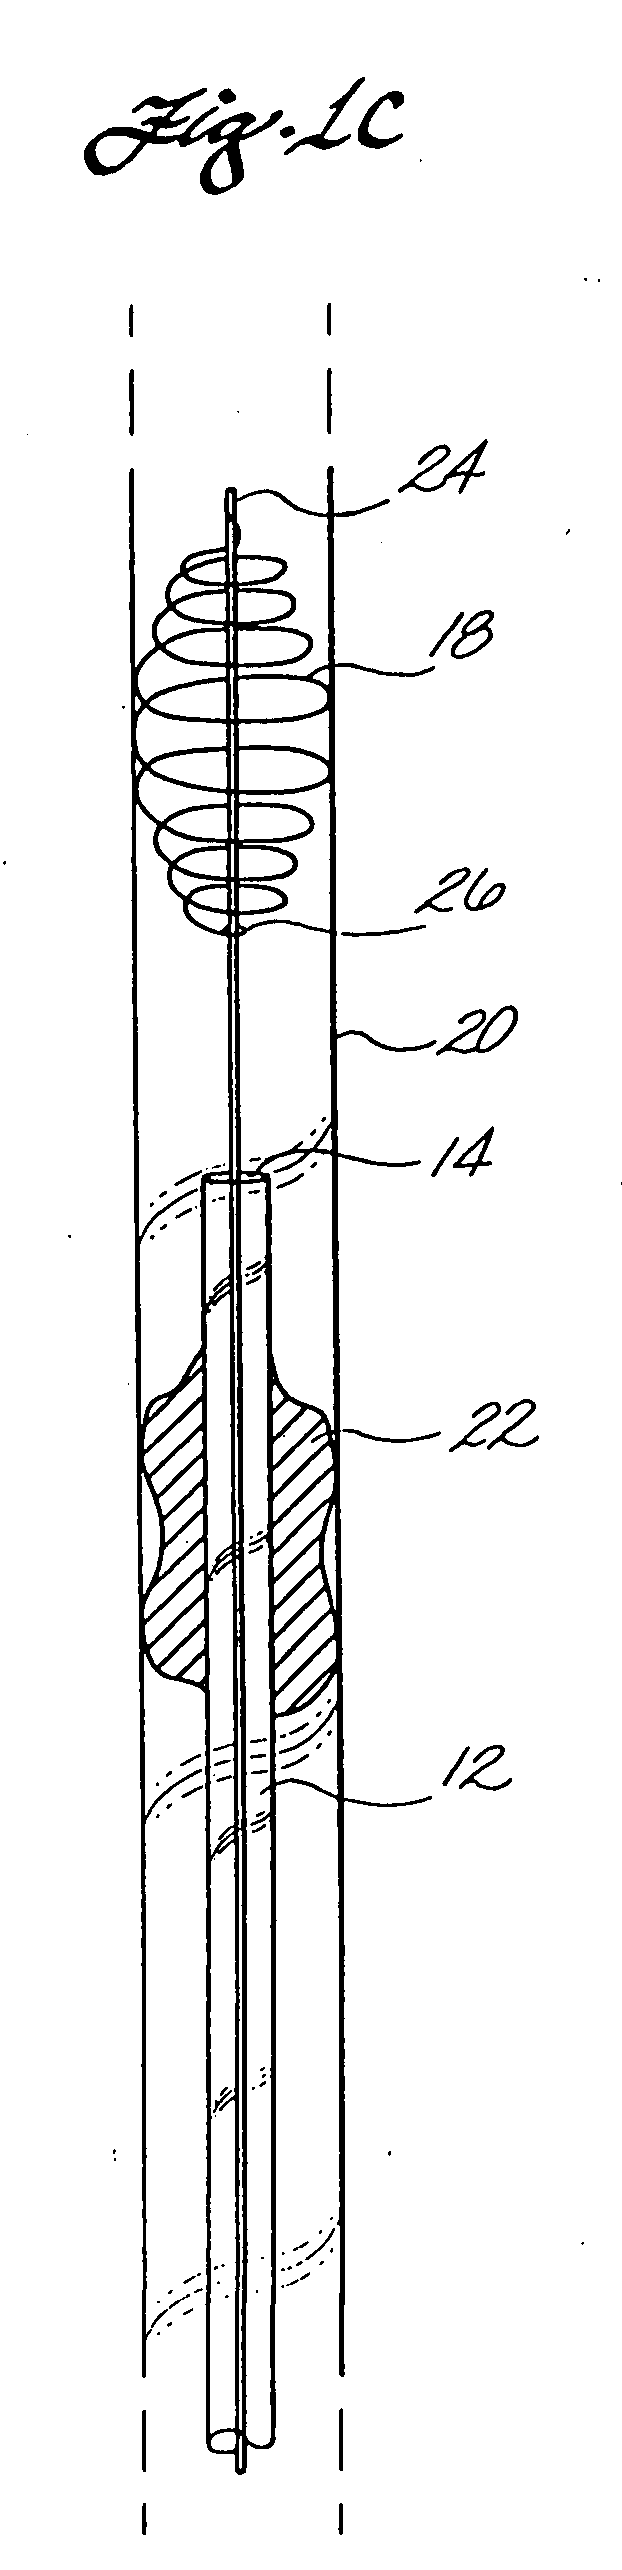 Clot capture coil and method of using same